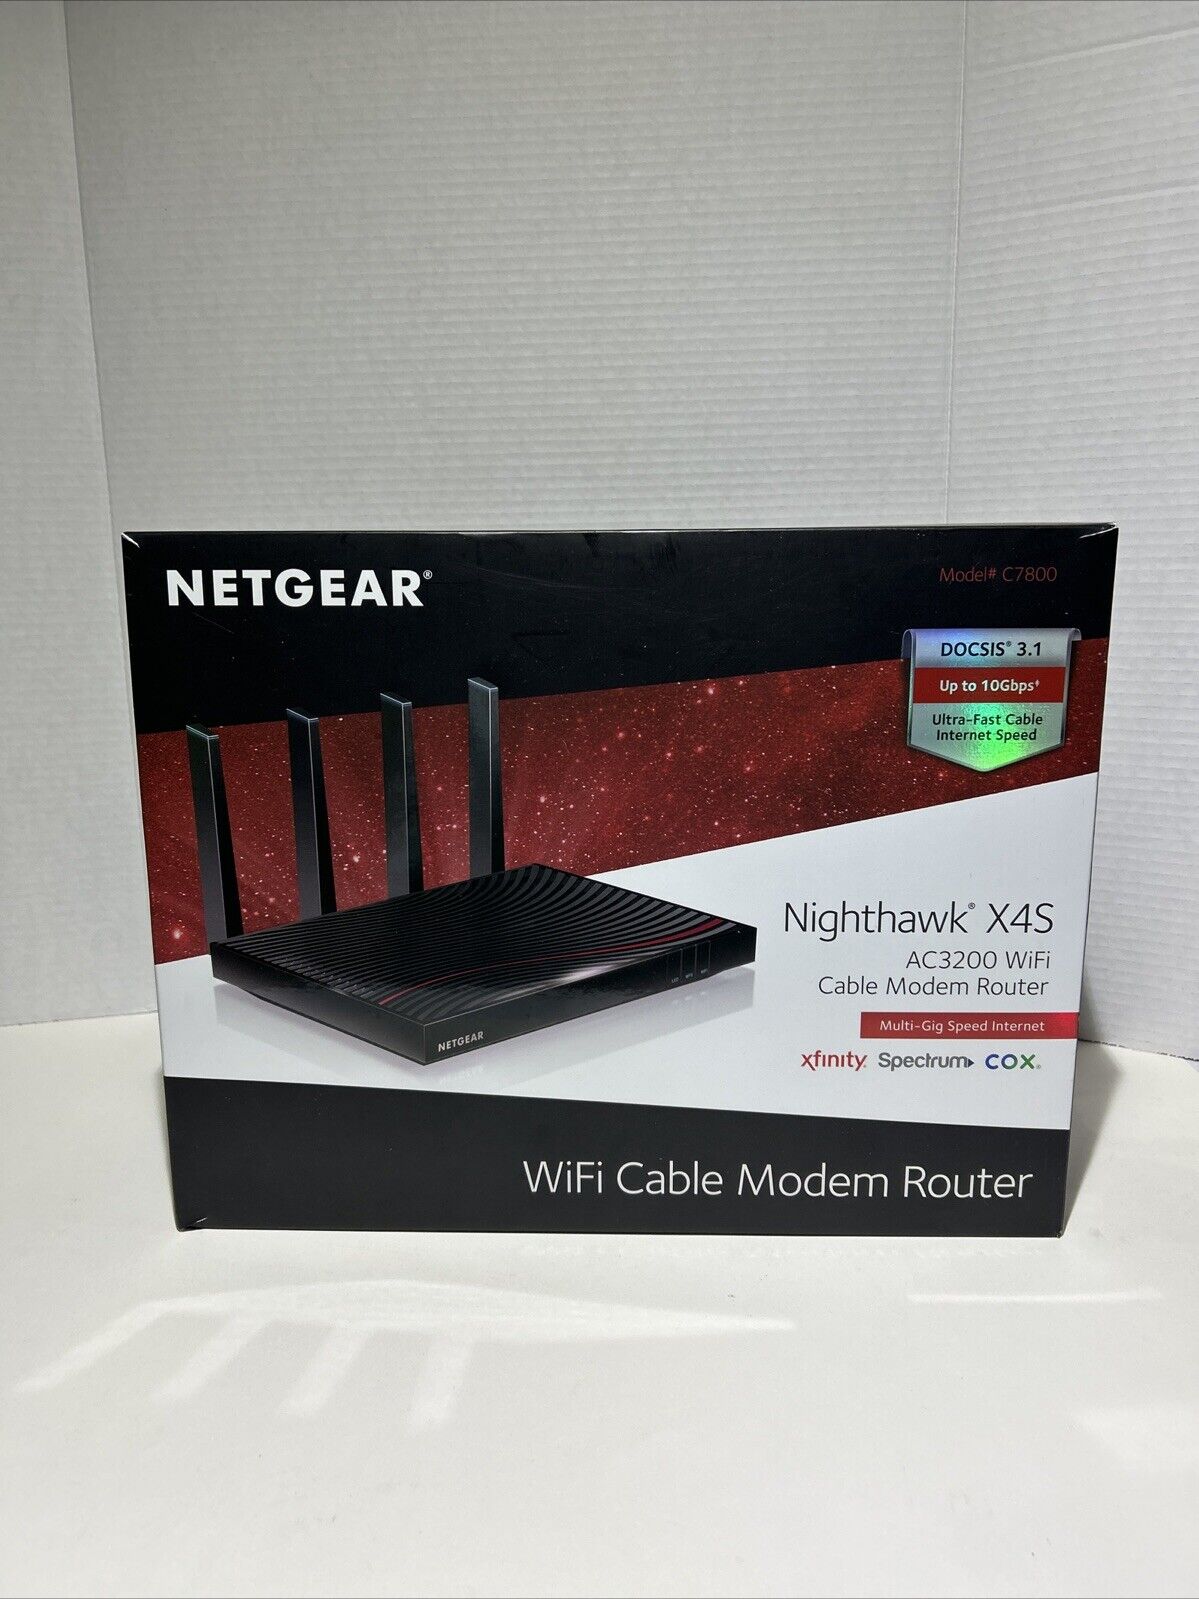 NETGEAR Nighthawk AC3200 Wi-Fi Router with DOCSIS 3.1 Cable Modem C7800 No Cord